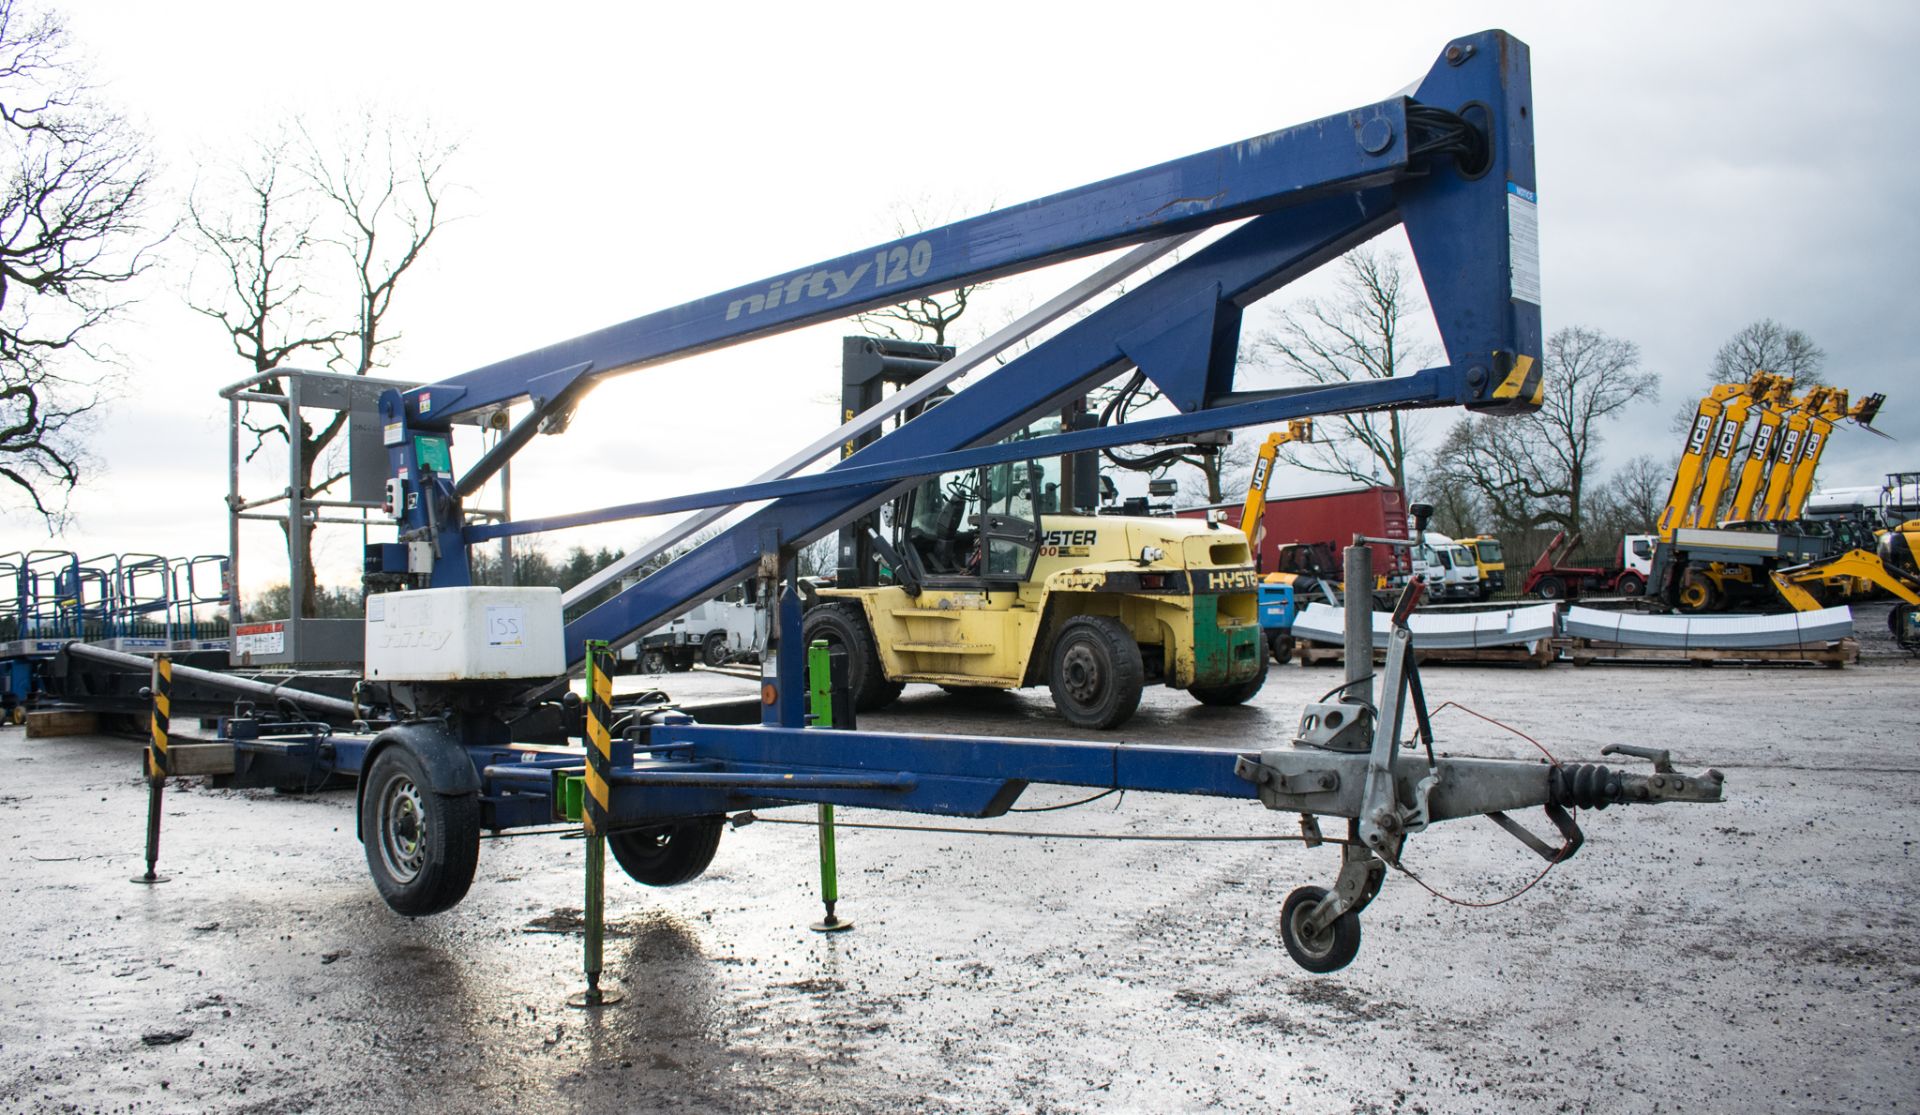 Nifty 120 ME fast tow articulated boom lift access platform Year: 2006 S/N: 015149 08660045